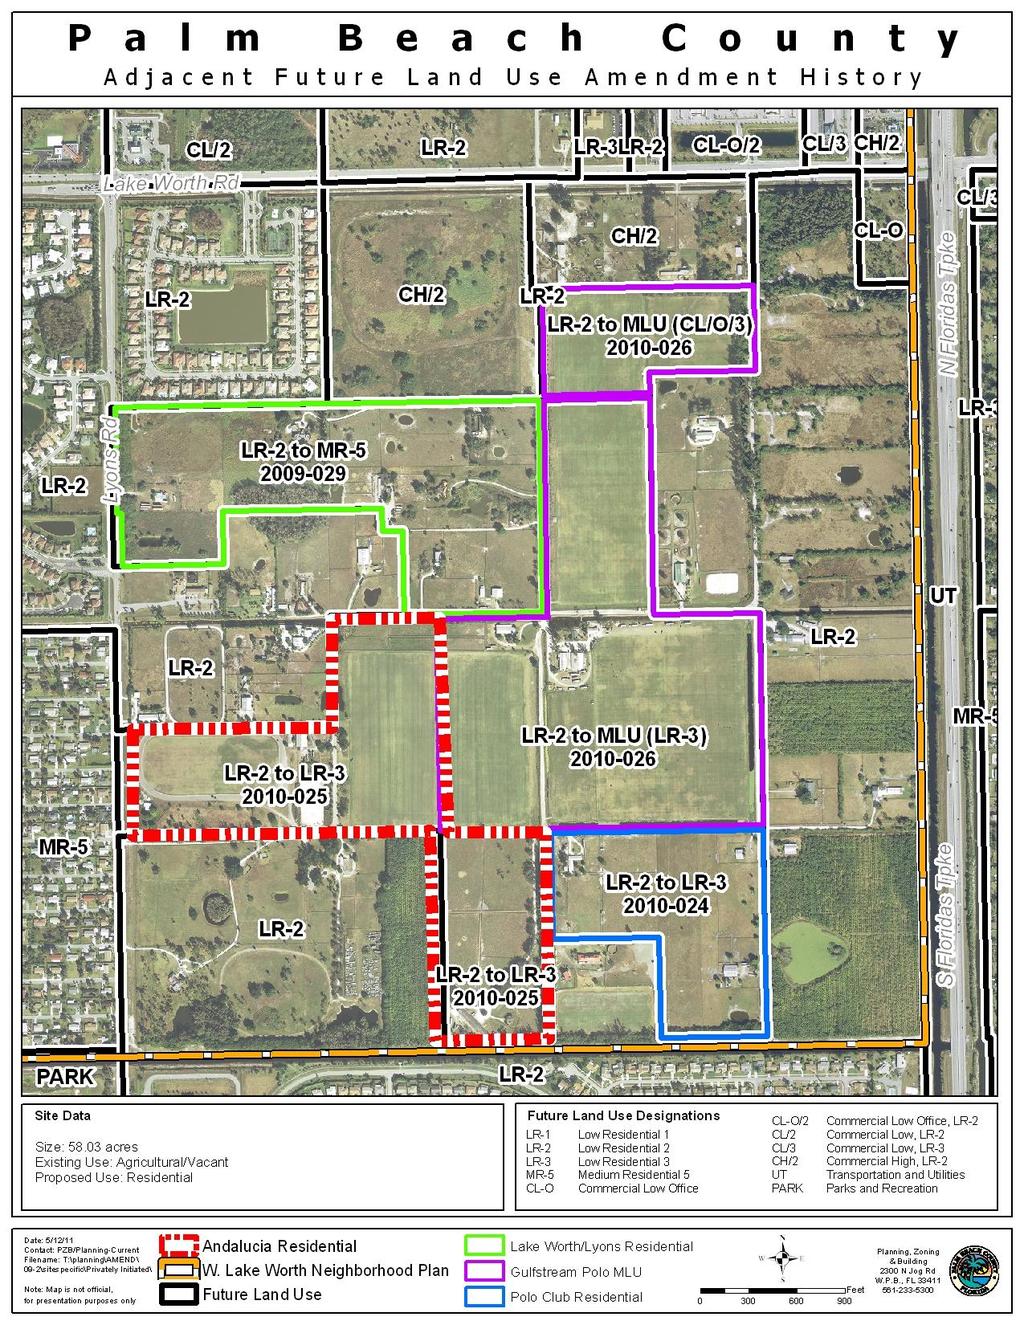 o Consistency with Comprehensive Plan The Planning Division has determined that the requests are consistent with the subject site s Low Residential 3 (LR-3) Future